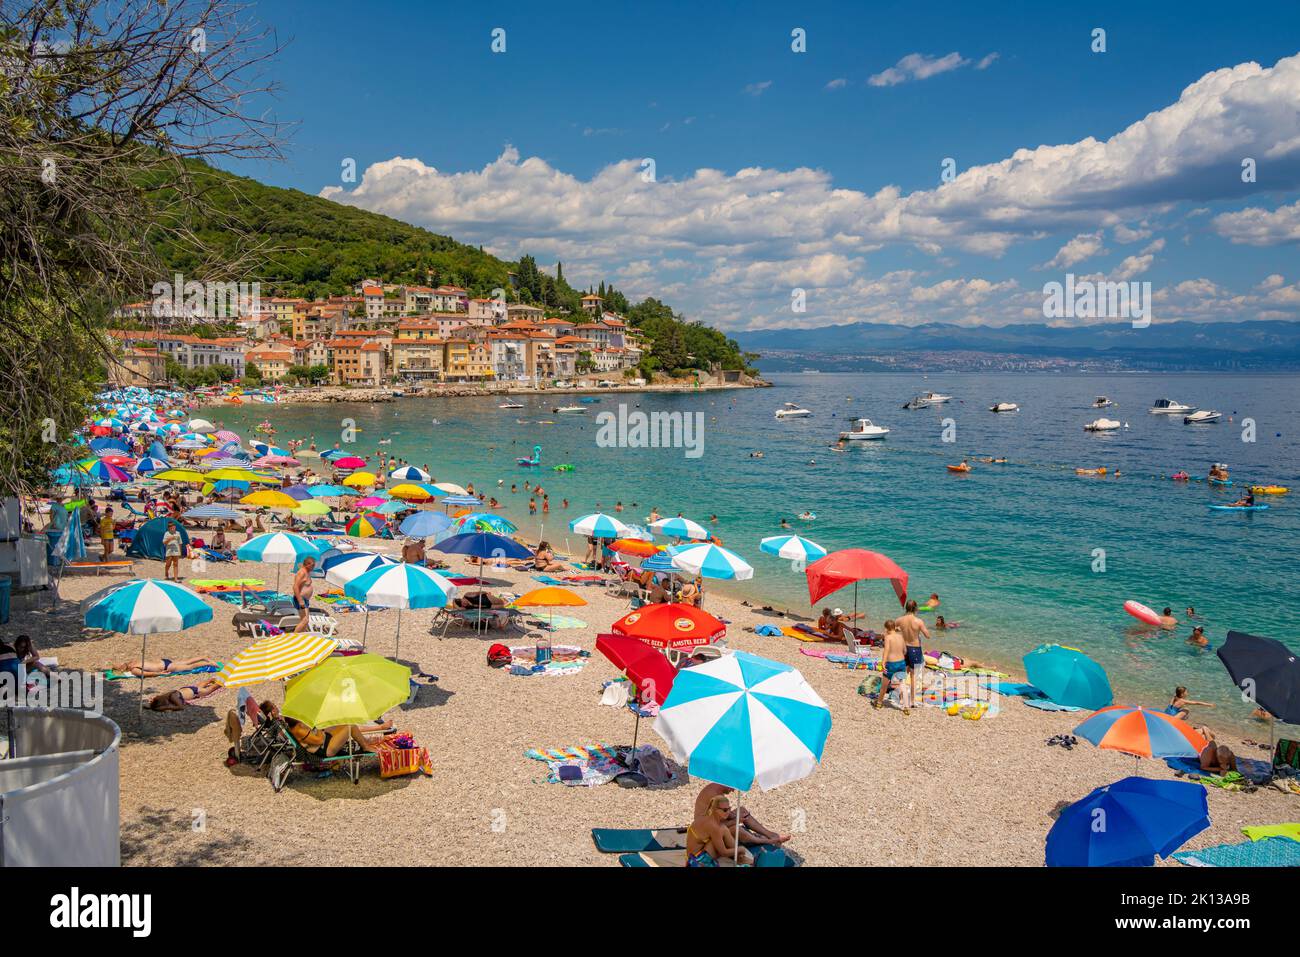 View of beach and the town in the background in Moscenicka Draga, Kvarner Bay, Eastern Istria, Croatia, Europe Stock Photo